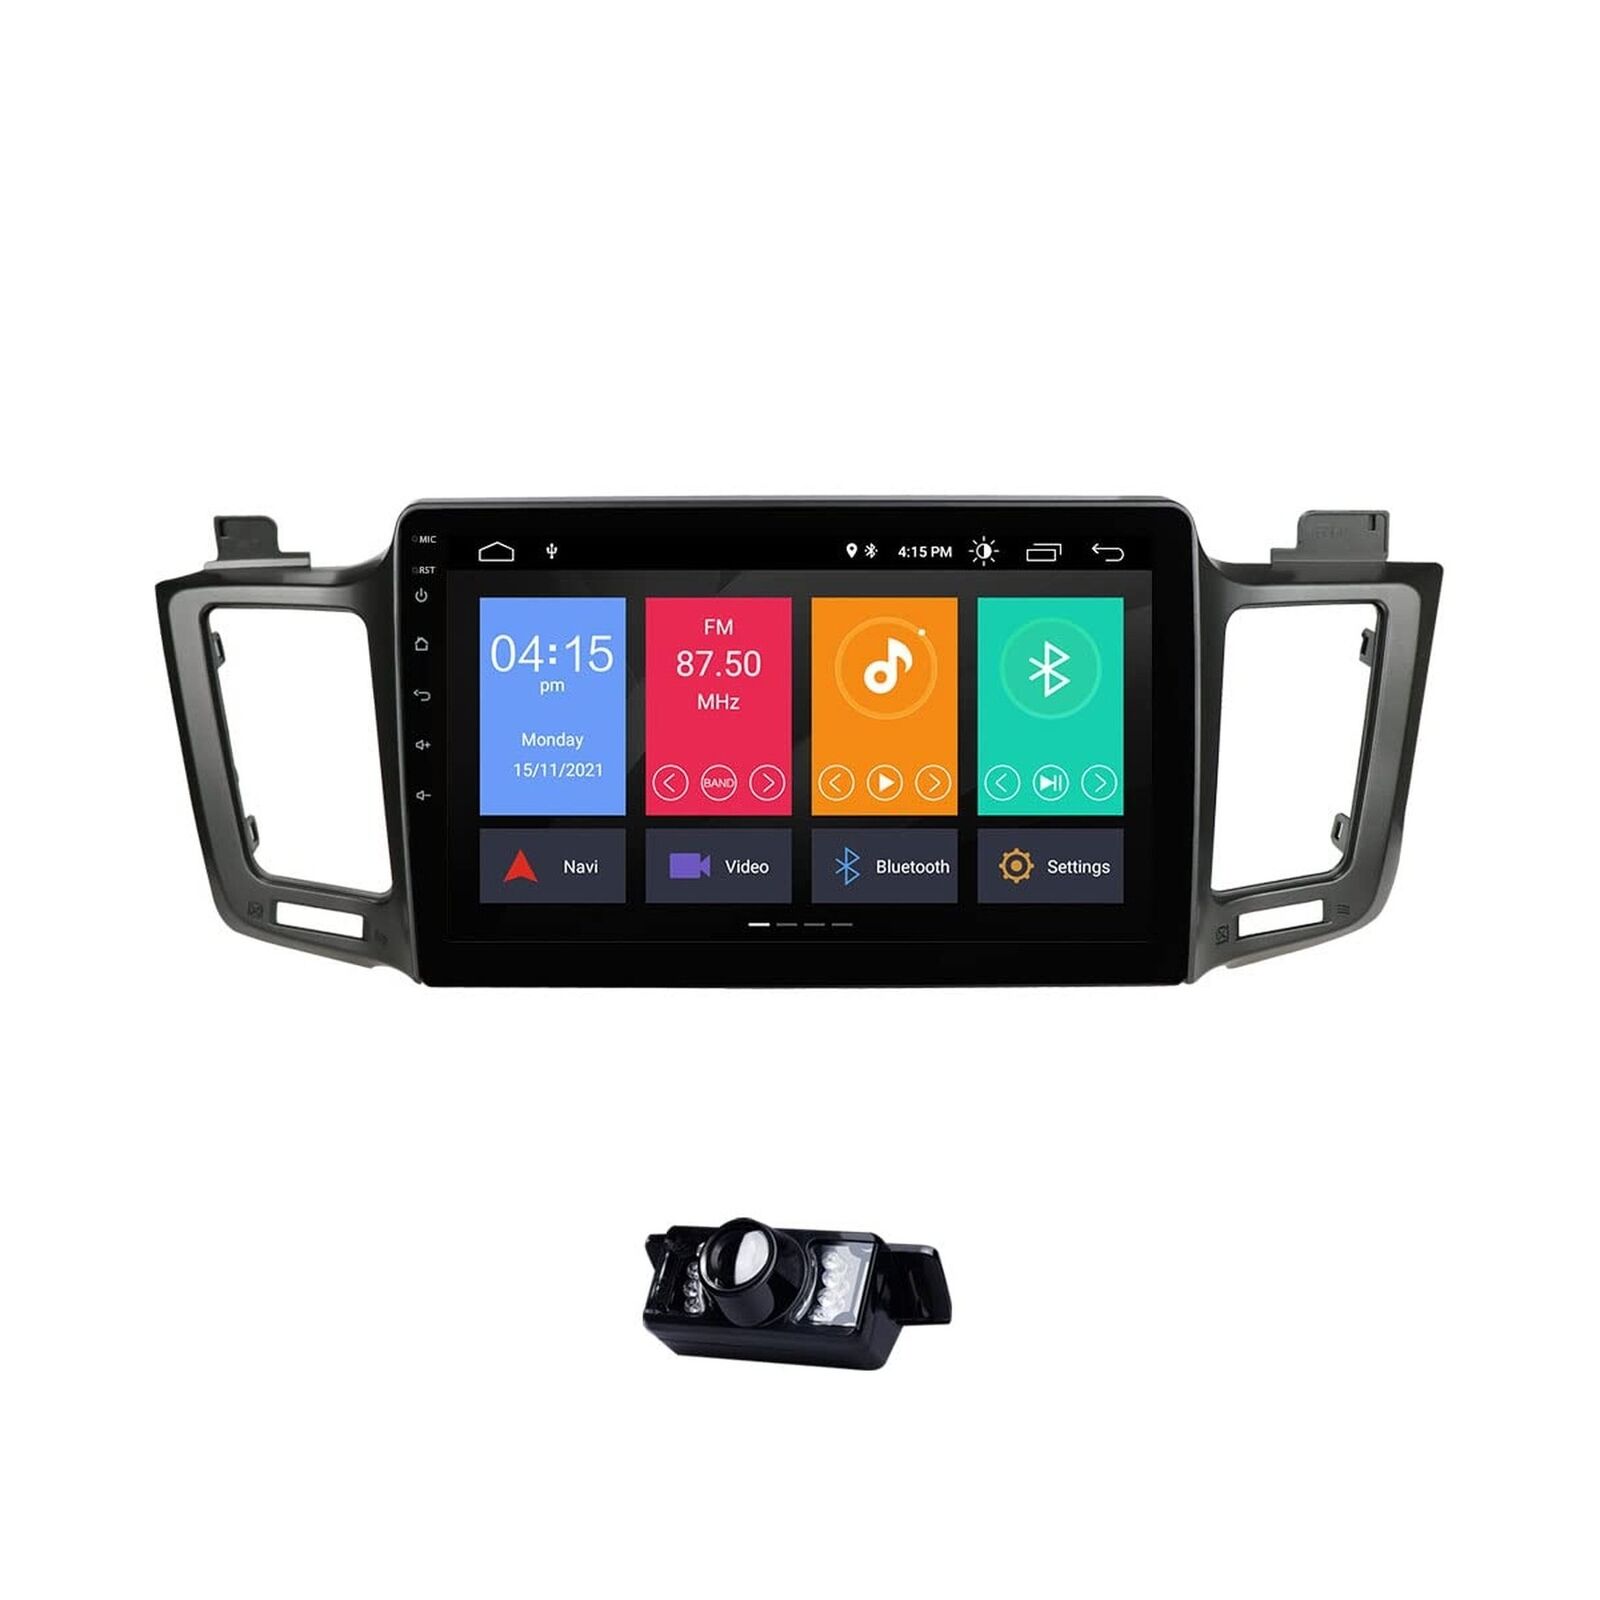 Android Car Stereo For toyota Rav4 2013 2014 2015 2016 2017 2018 Support Appl...